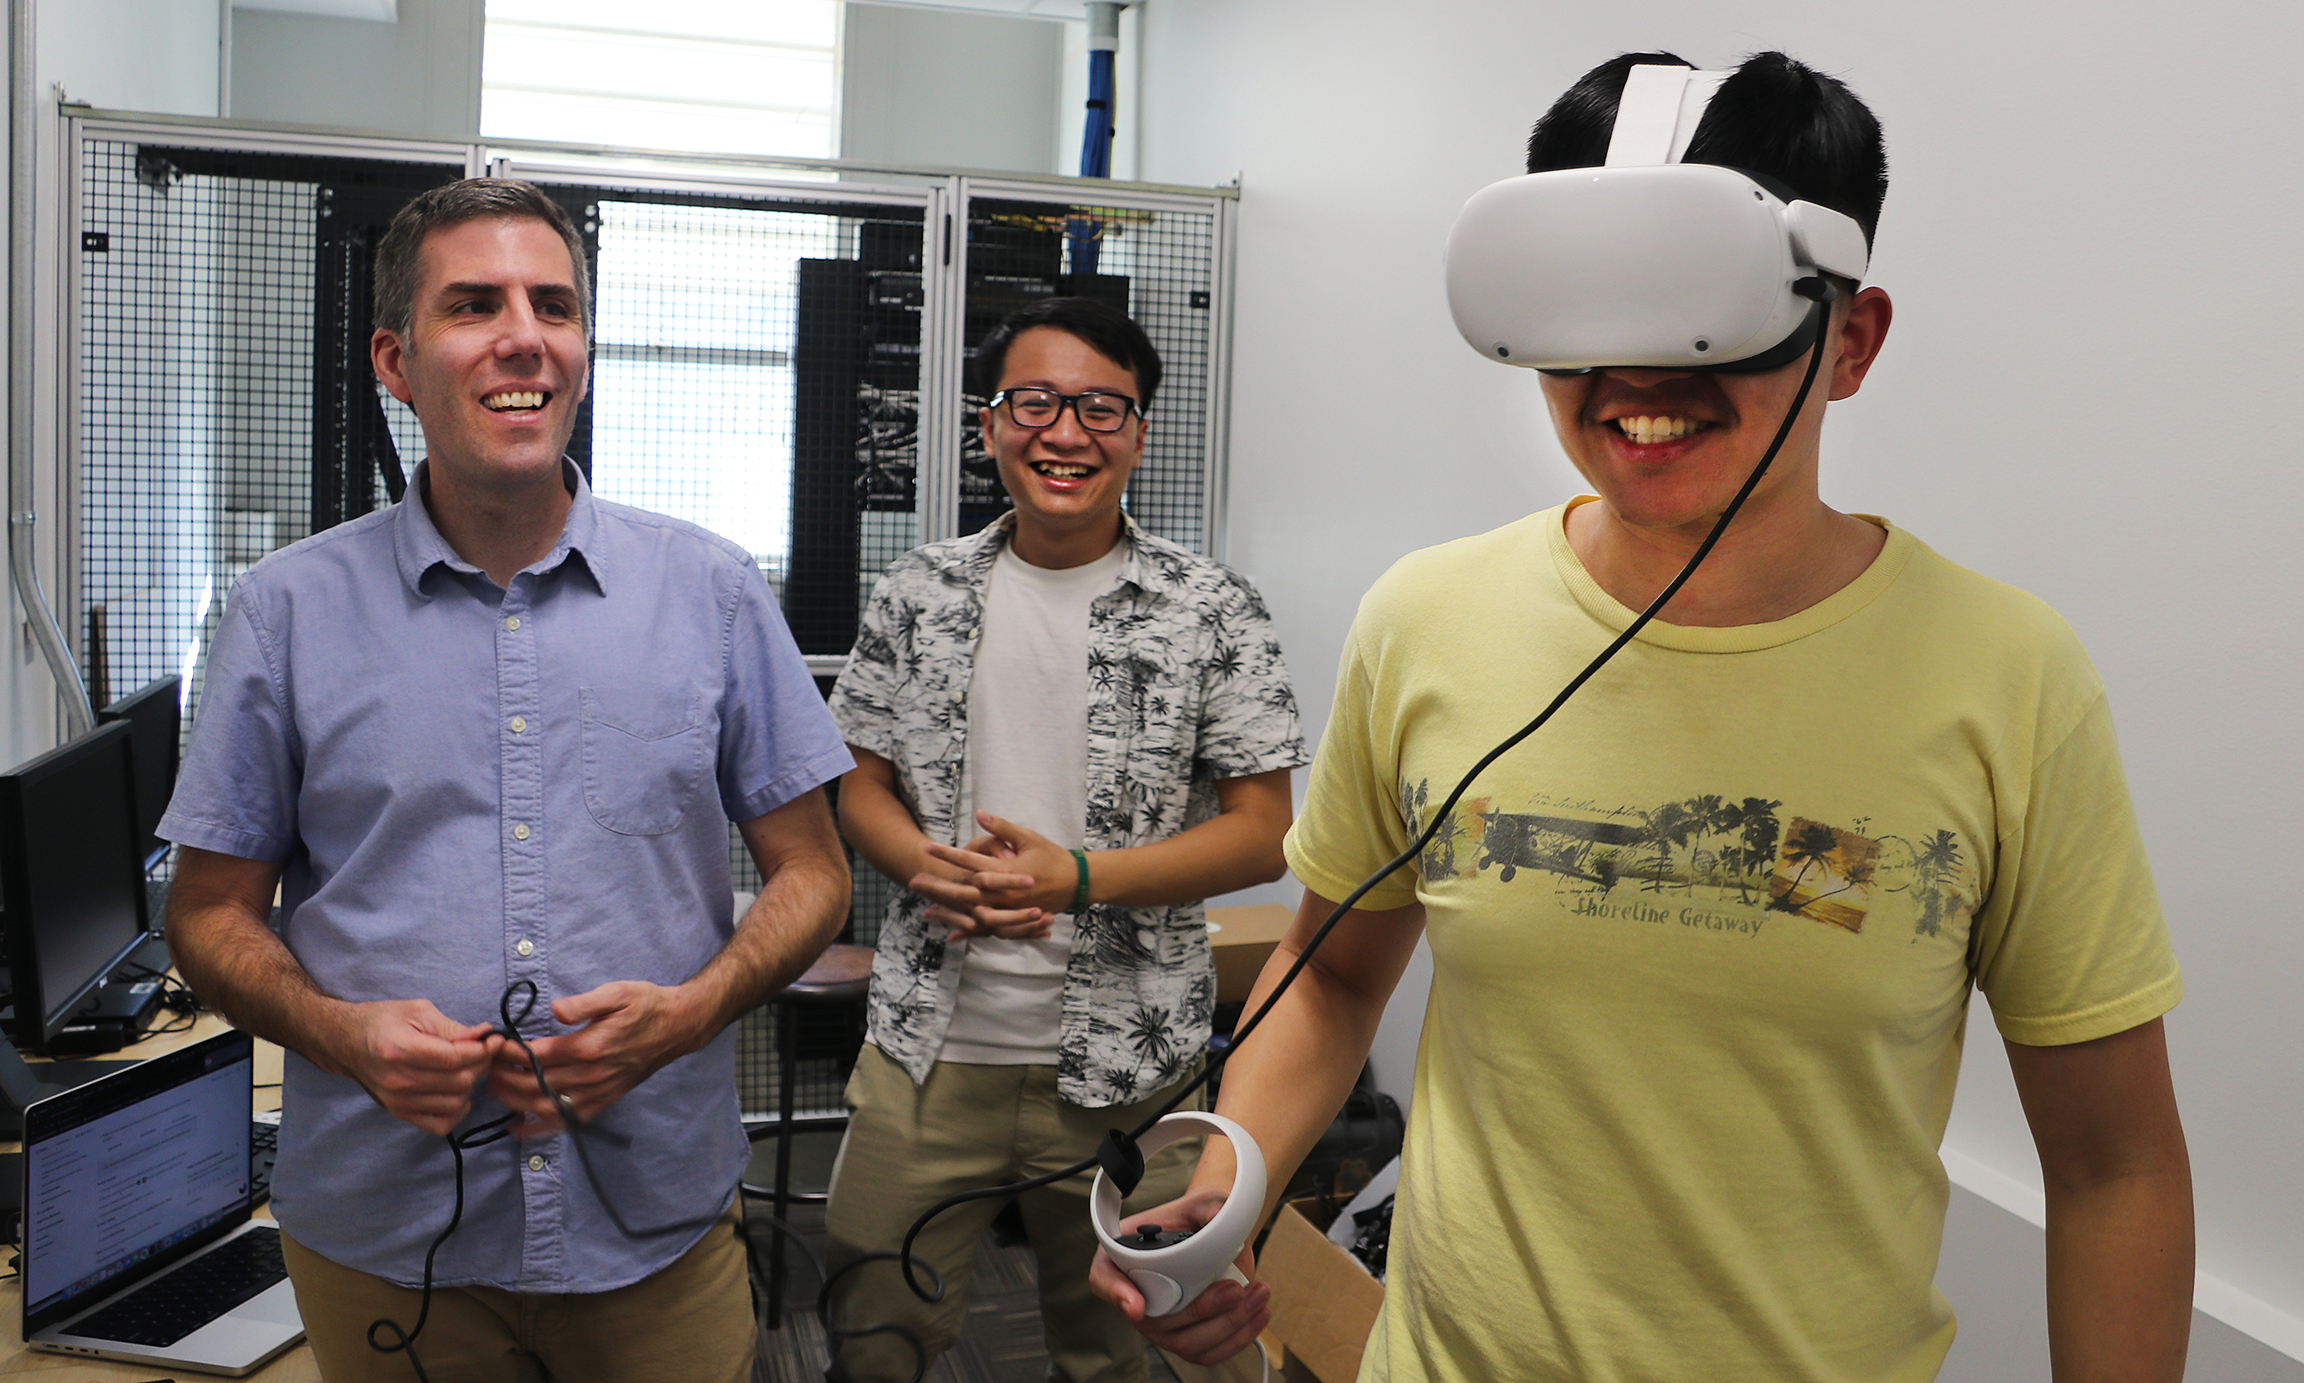 Professor Ventura aids two students as they use VR equipment in a lab at Cal Poly